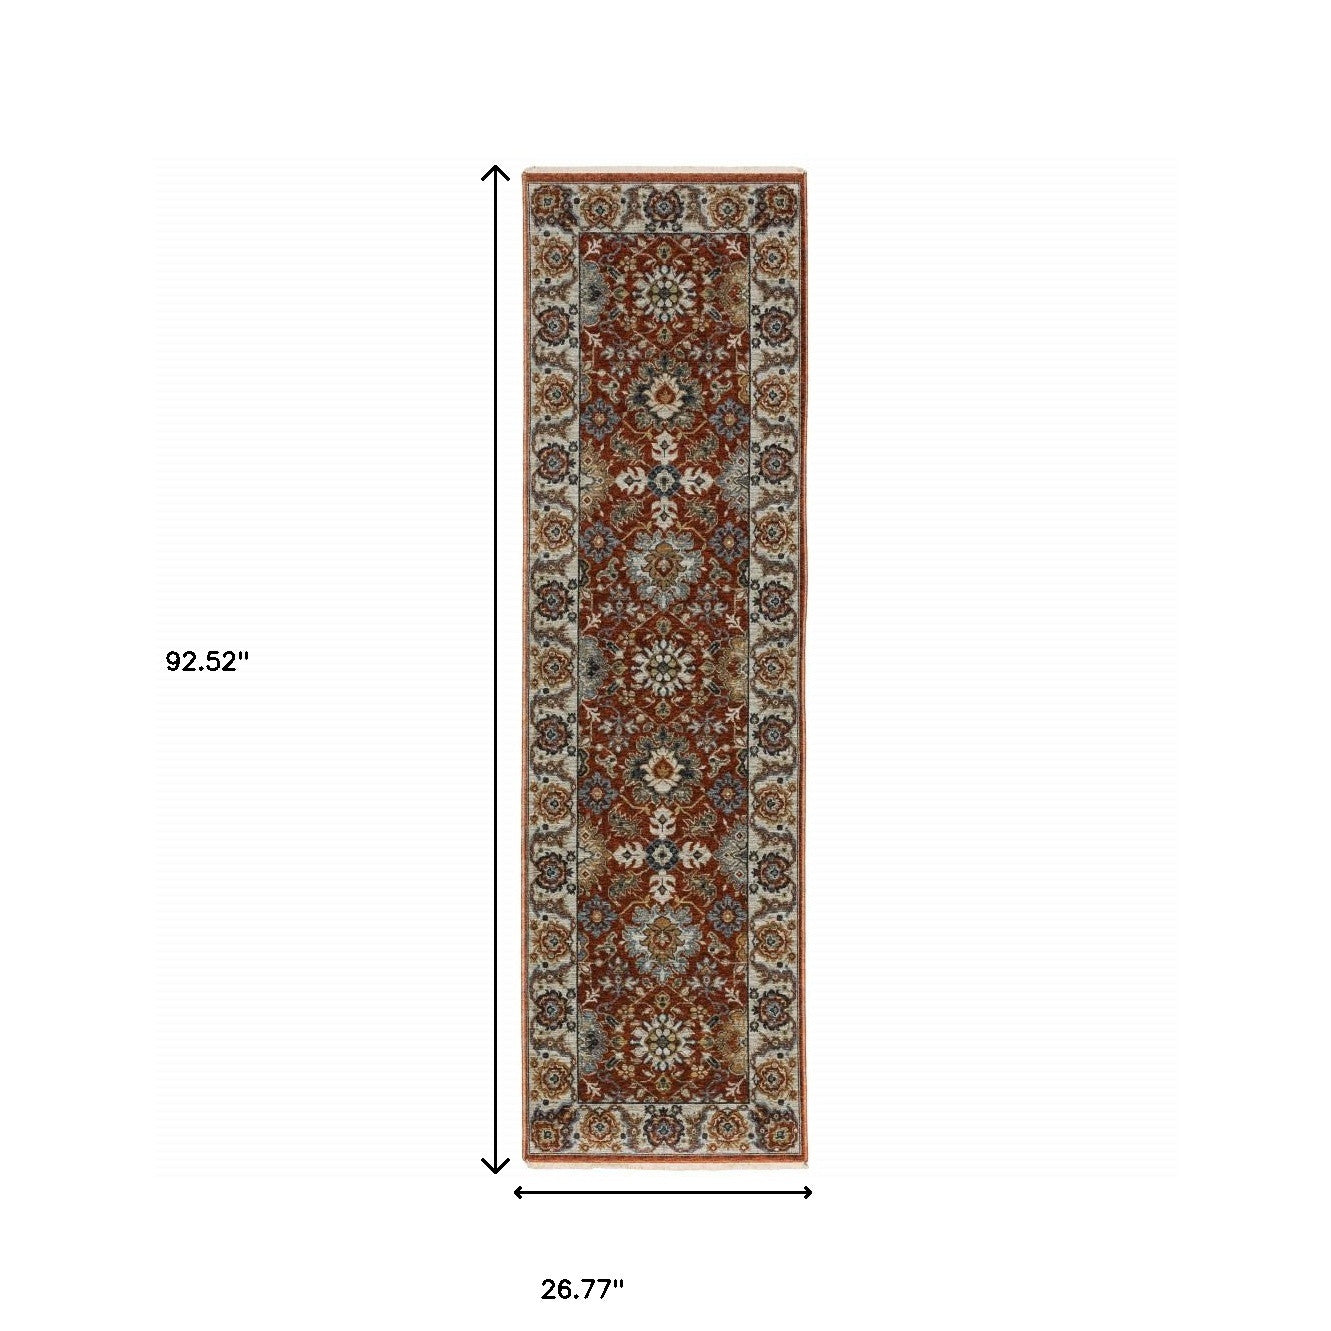 2' X 8' Red Blue Ivory Gold And Navy Oriental Power Loom Stain Resistant Runner Rug With Fringe